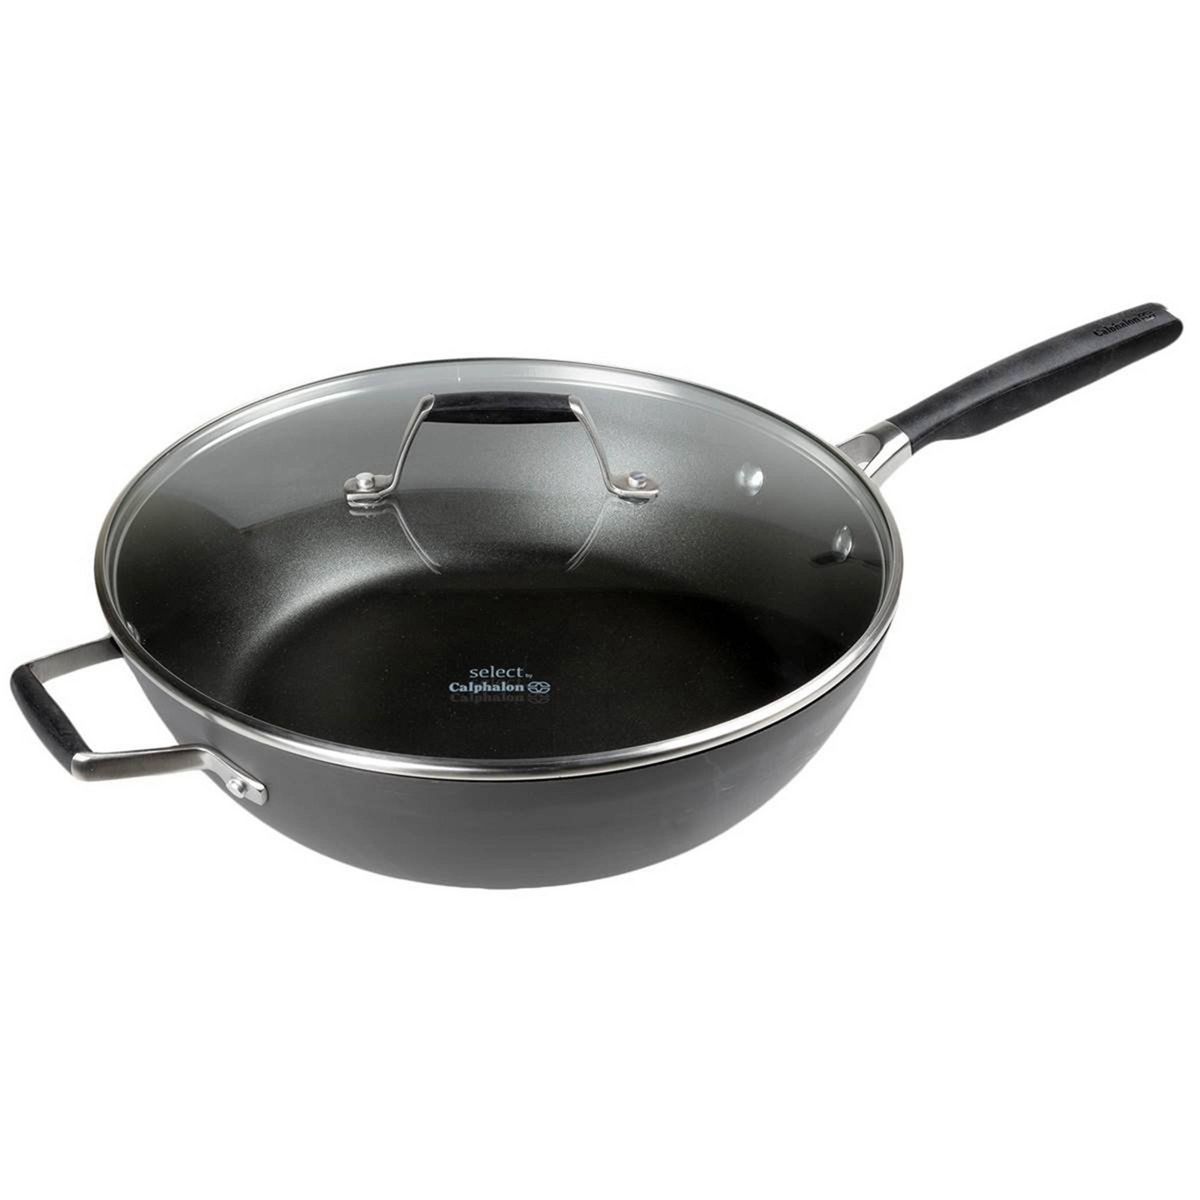 Select by Calphalon with AquaShield Nonstick 12" Jumbo Fry Pan with Lid | Target